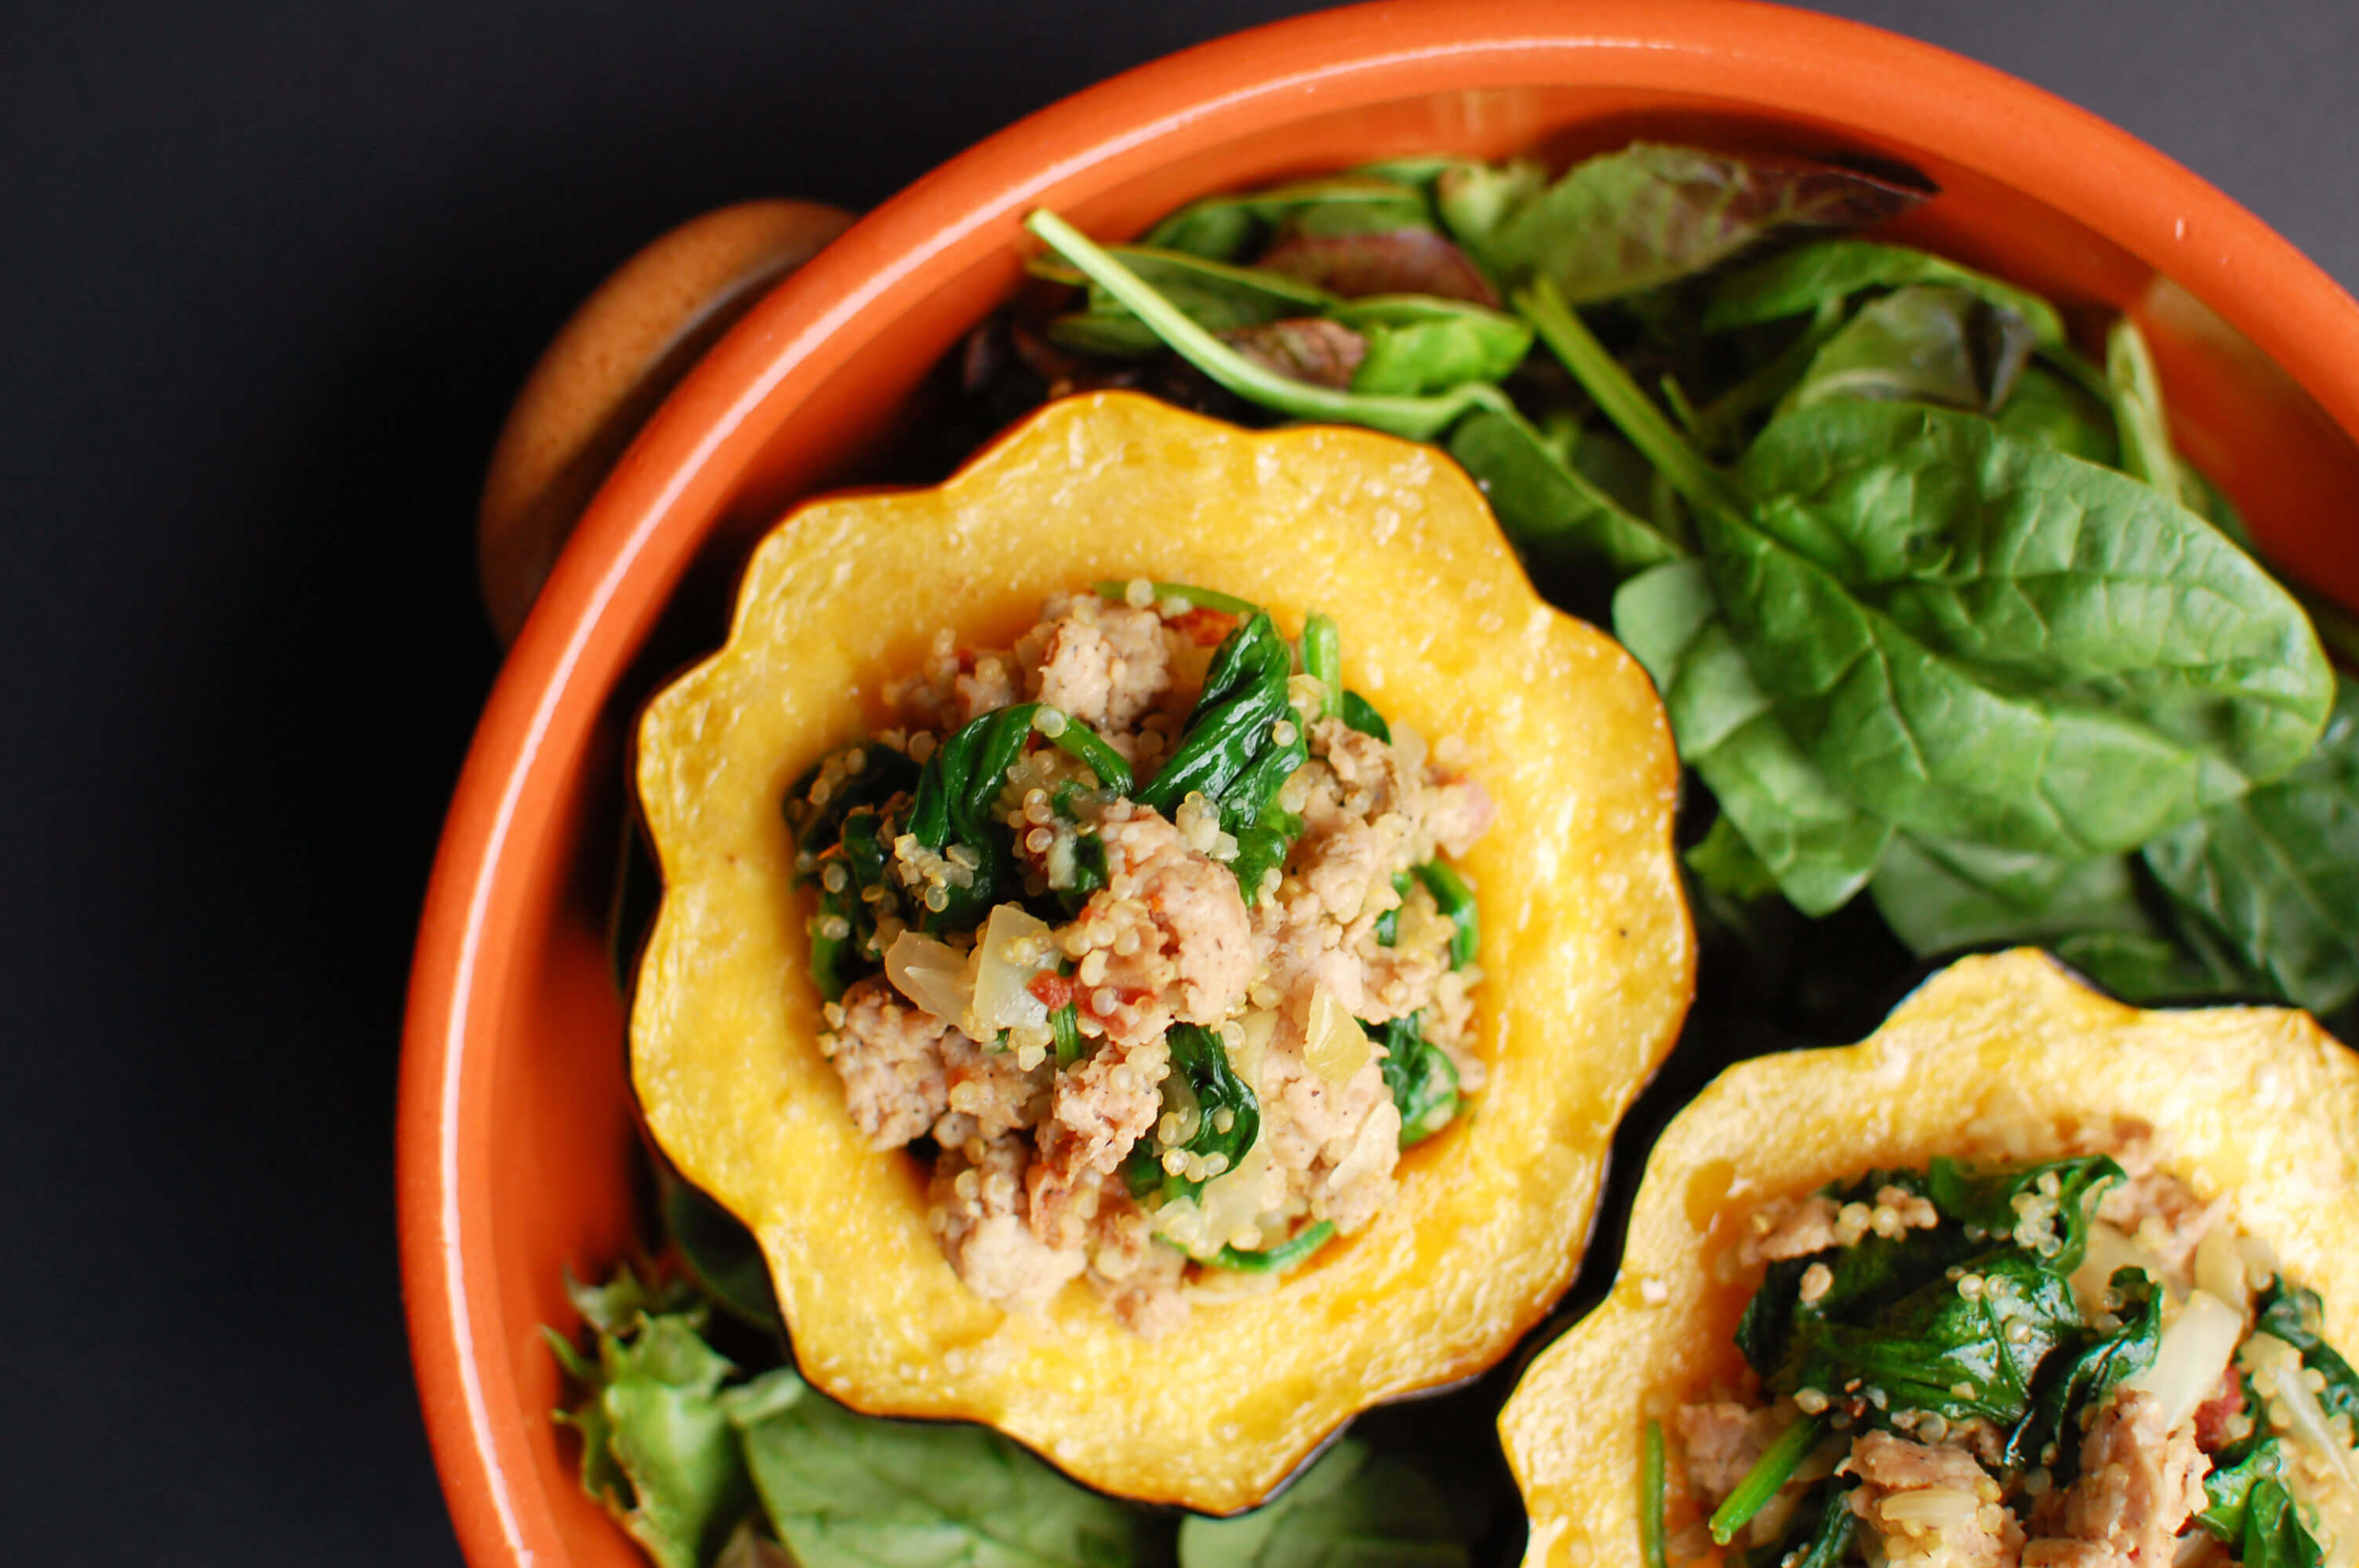 20 Healthy Fall & Thanksgiving Meal Ideas Your Clients Will Love: Sausage & Quinoa Stuffed Acorn Squash